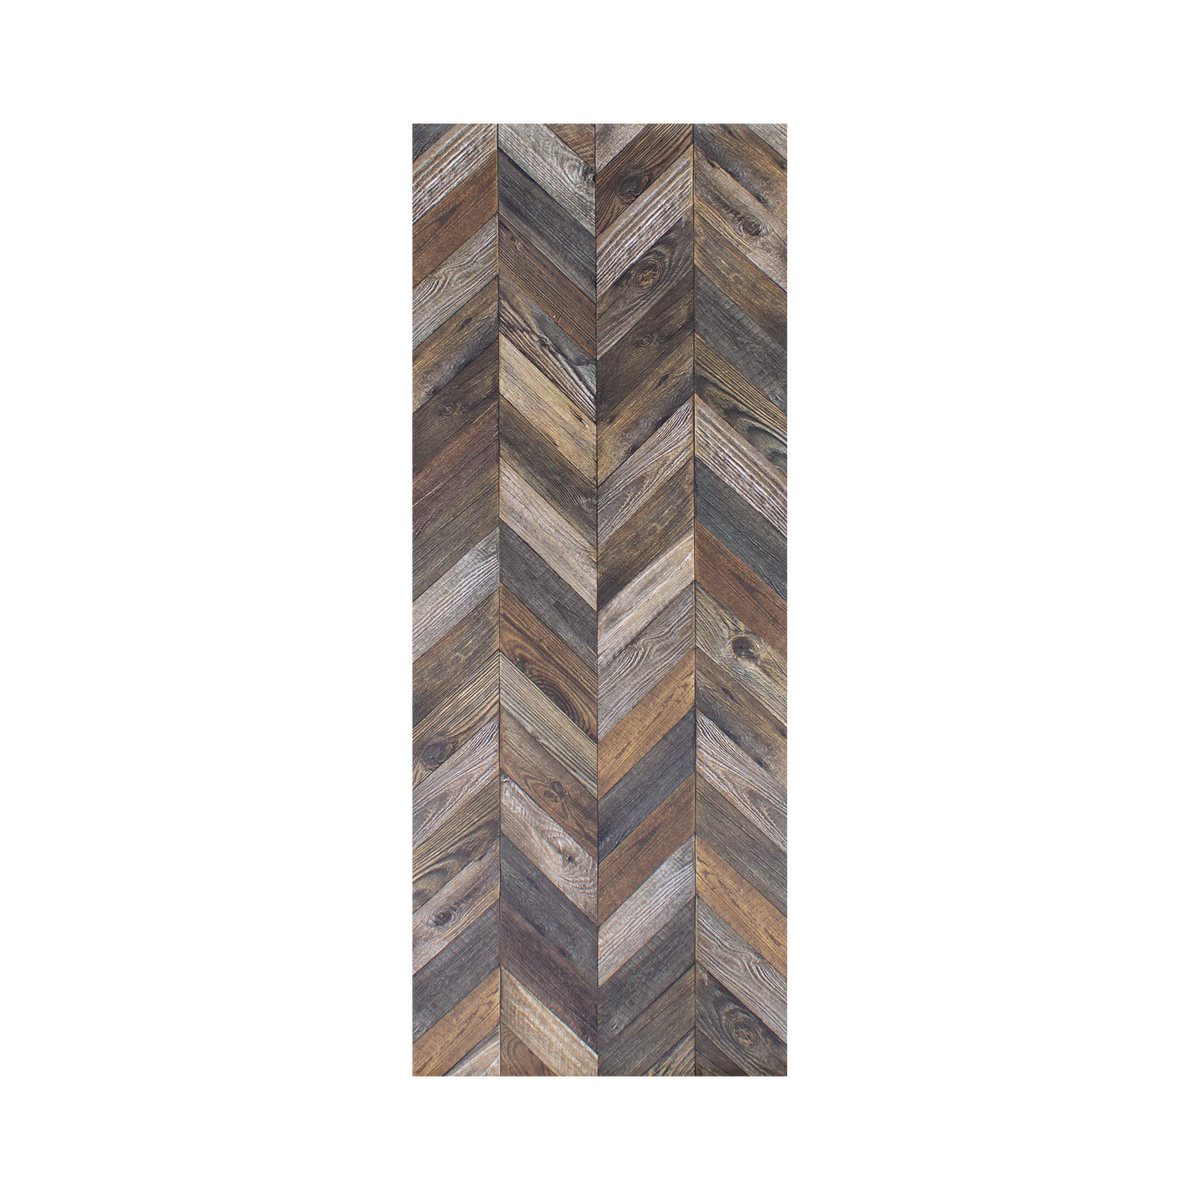 Rediscover the timeless charm of beautiful raw pine planks with this trompe l'oeil vinyl imitation parquet herringbone rug with ancestral planks.